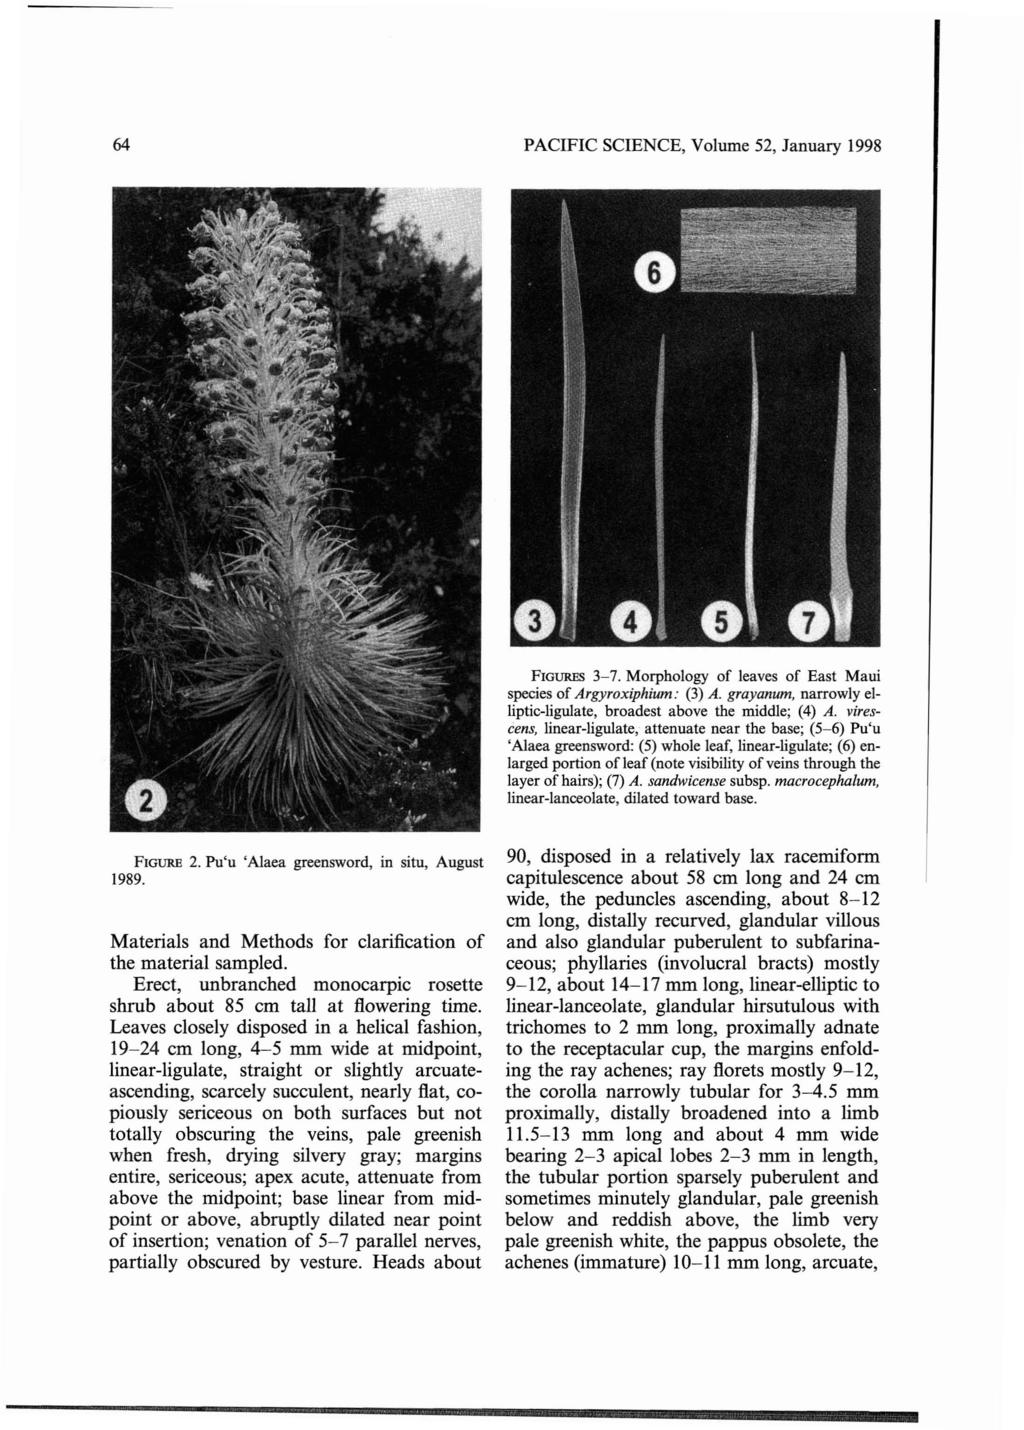 64 PACIFIC SCIENCE, Volume 52, January 1998 FIGURES 3-7. Morphology of leaves of East Maui species of Argyroxiphium: (3) A. grayanum, narrowly elliptic-ligulate, broadest above the middle; (4) A.